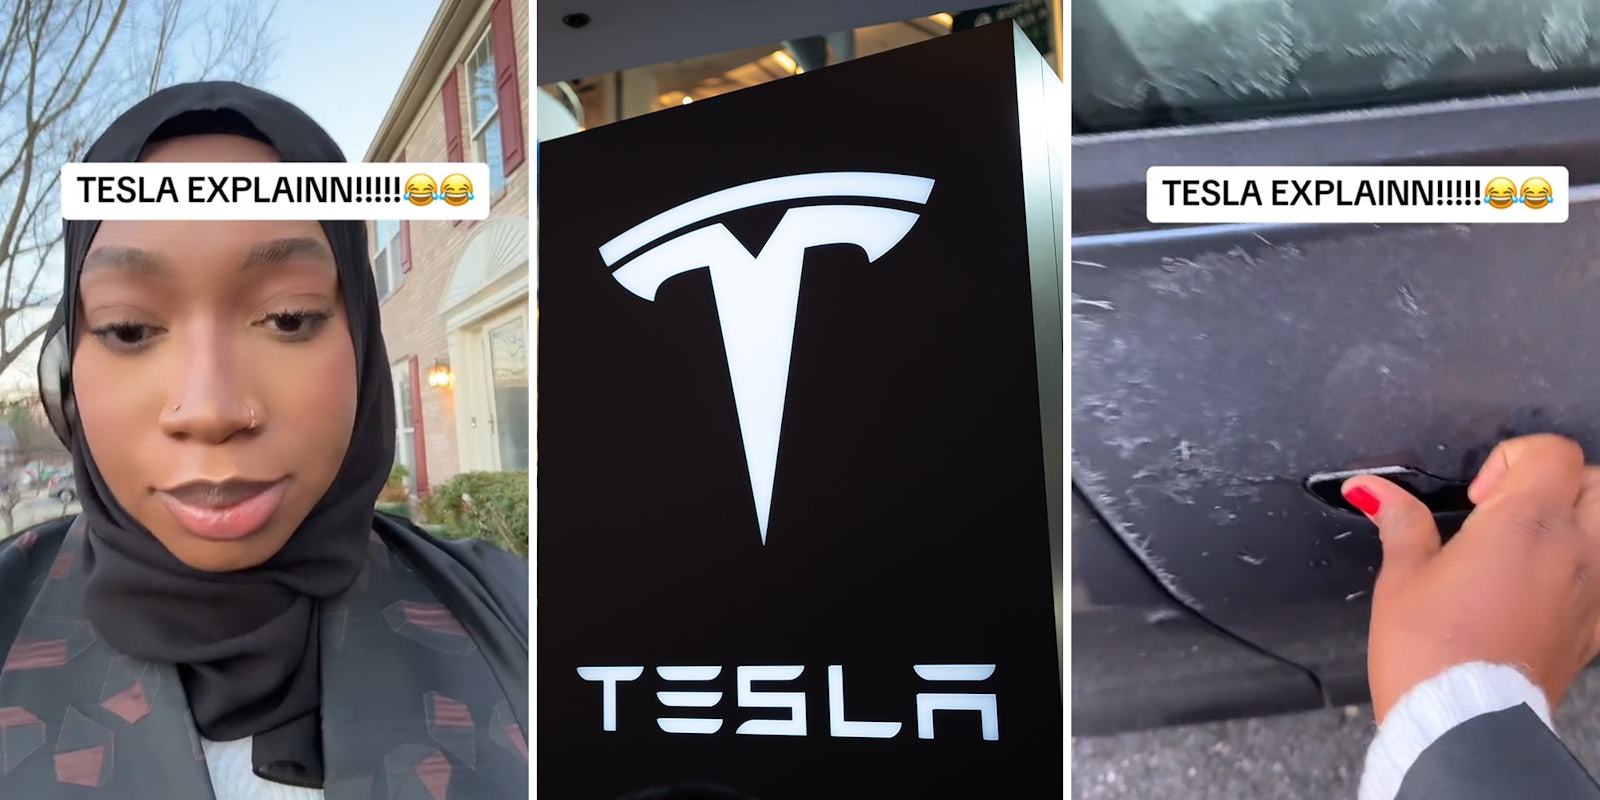 Woman locked out of Tesla after handles freeze